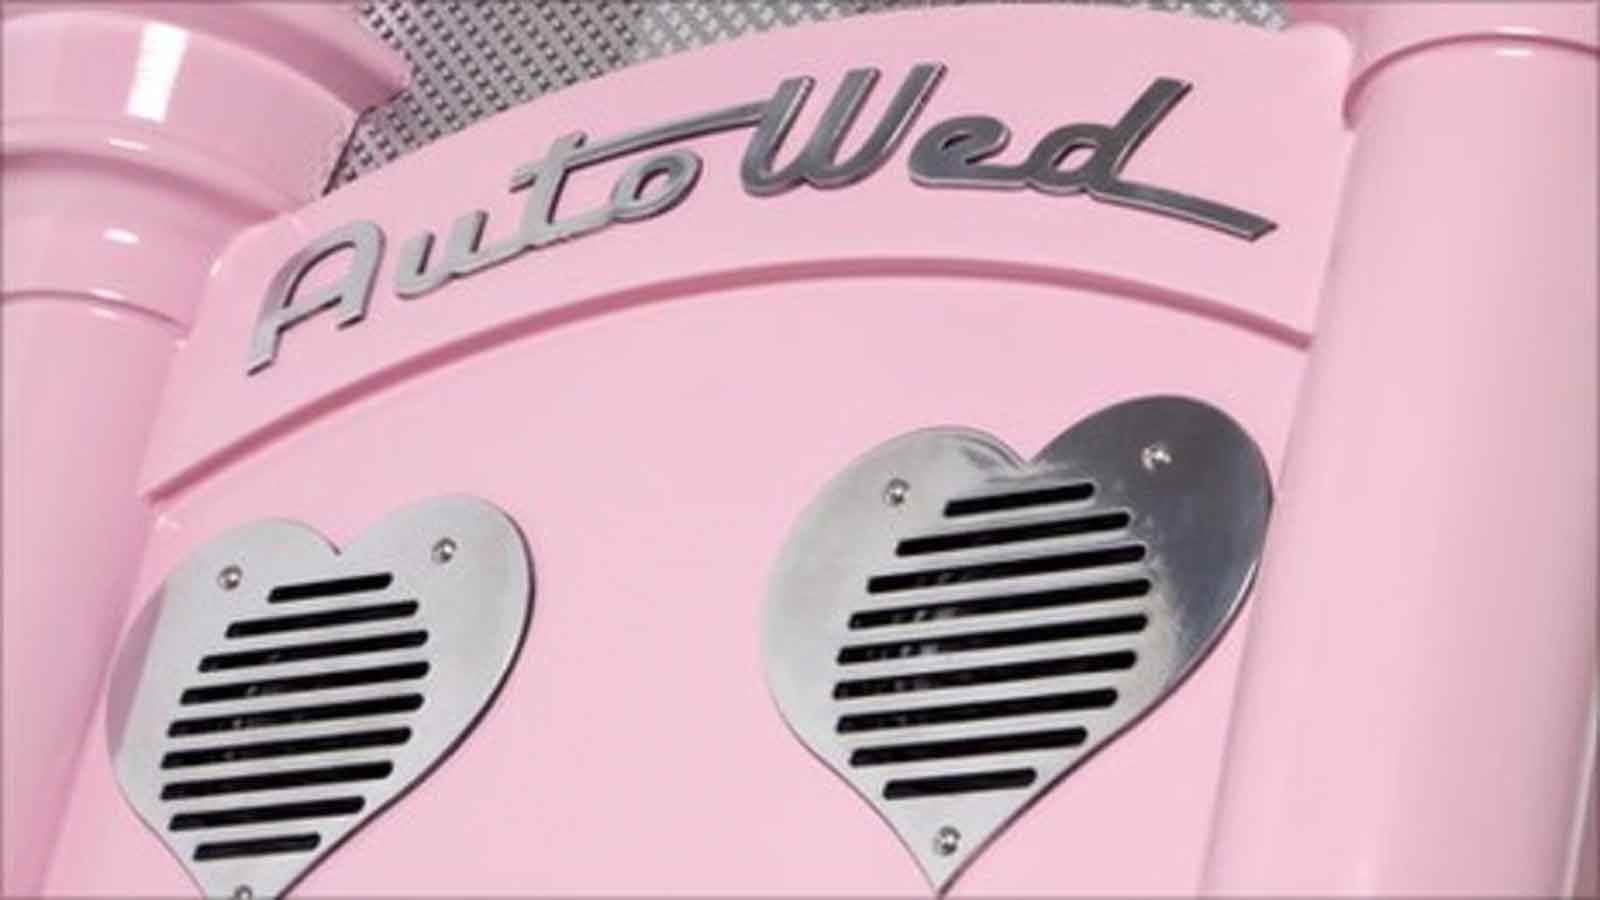 AutoWed: The Wedding Vending Machine That Can Marry You